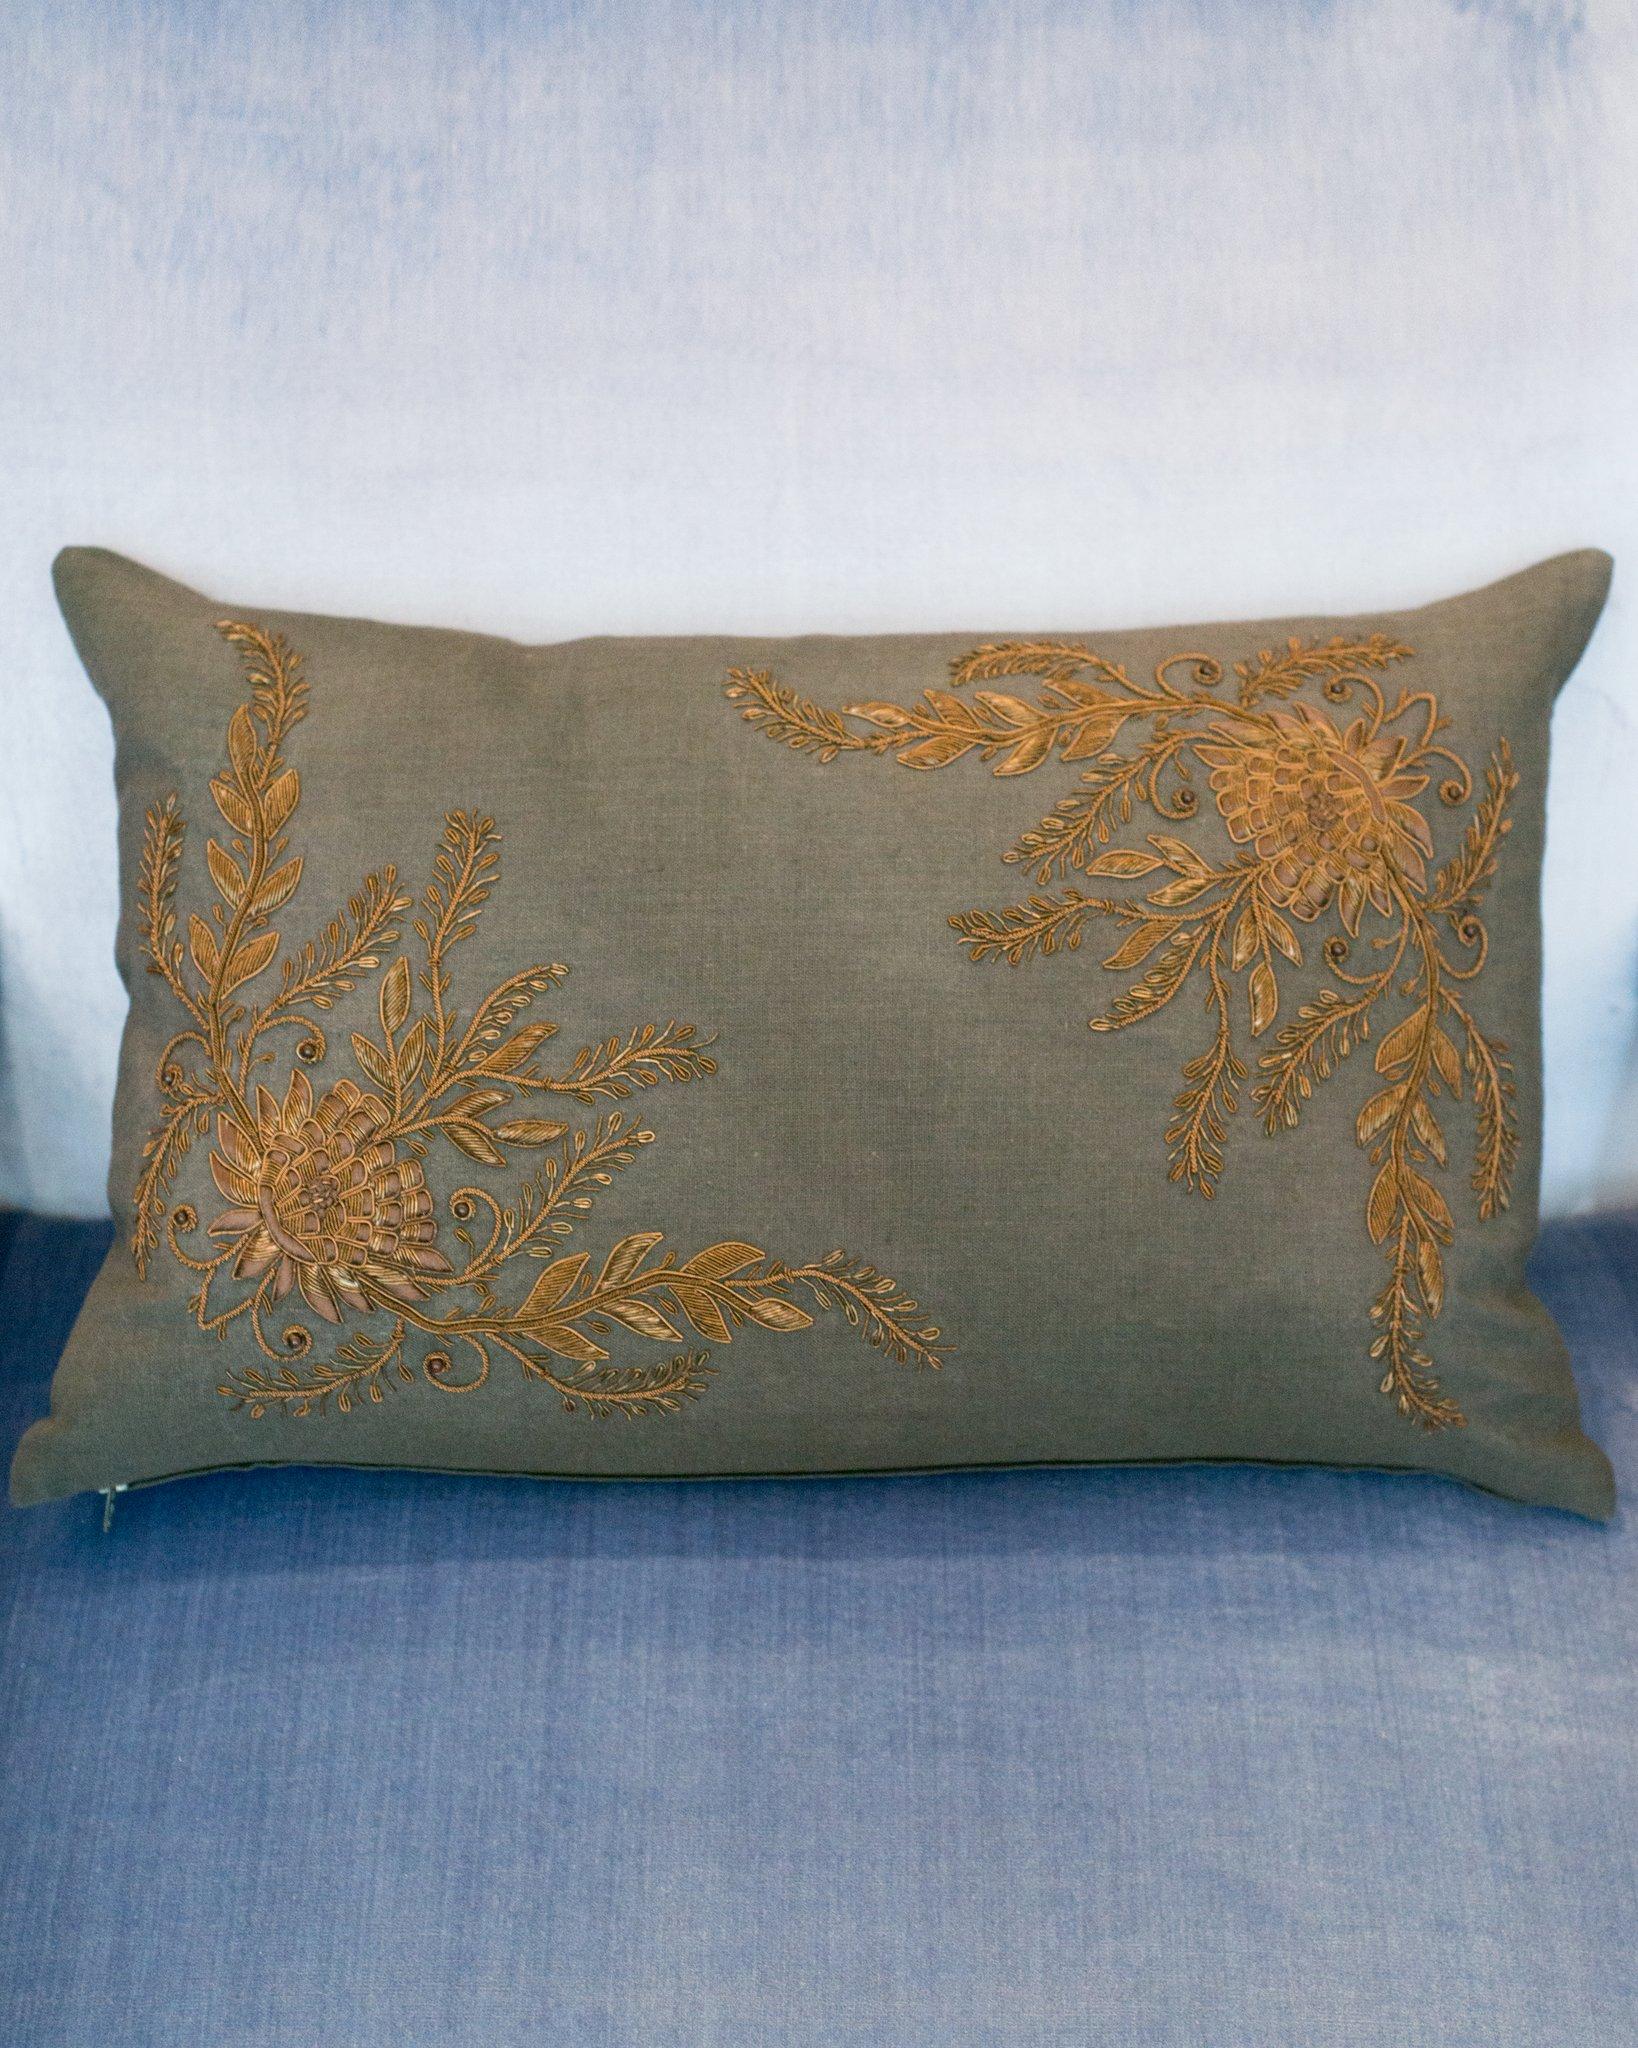 A charcoal linen pillow with metallic floral embroidery, down filled, made in India.